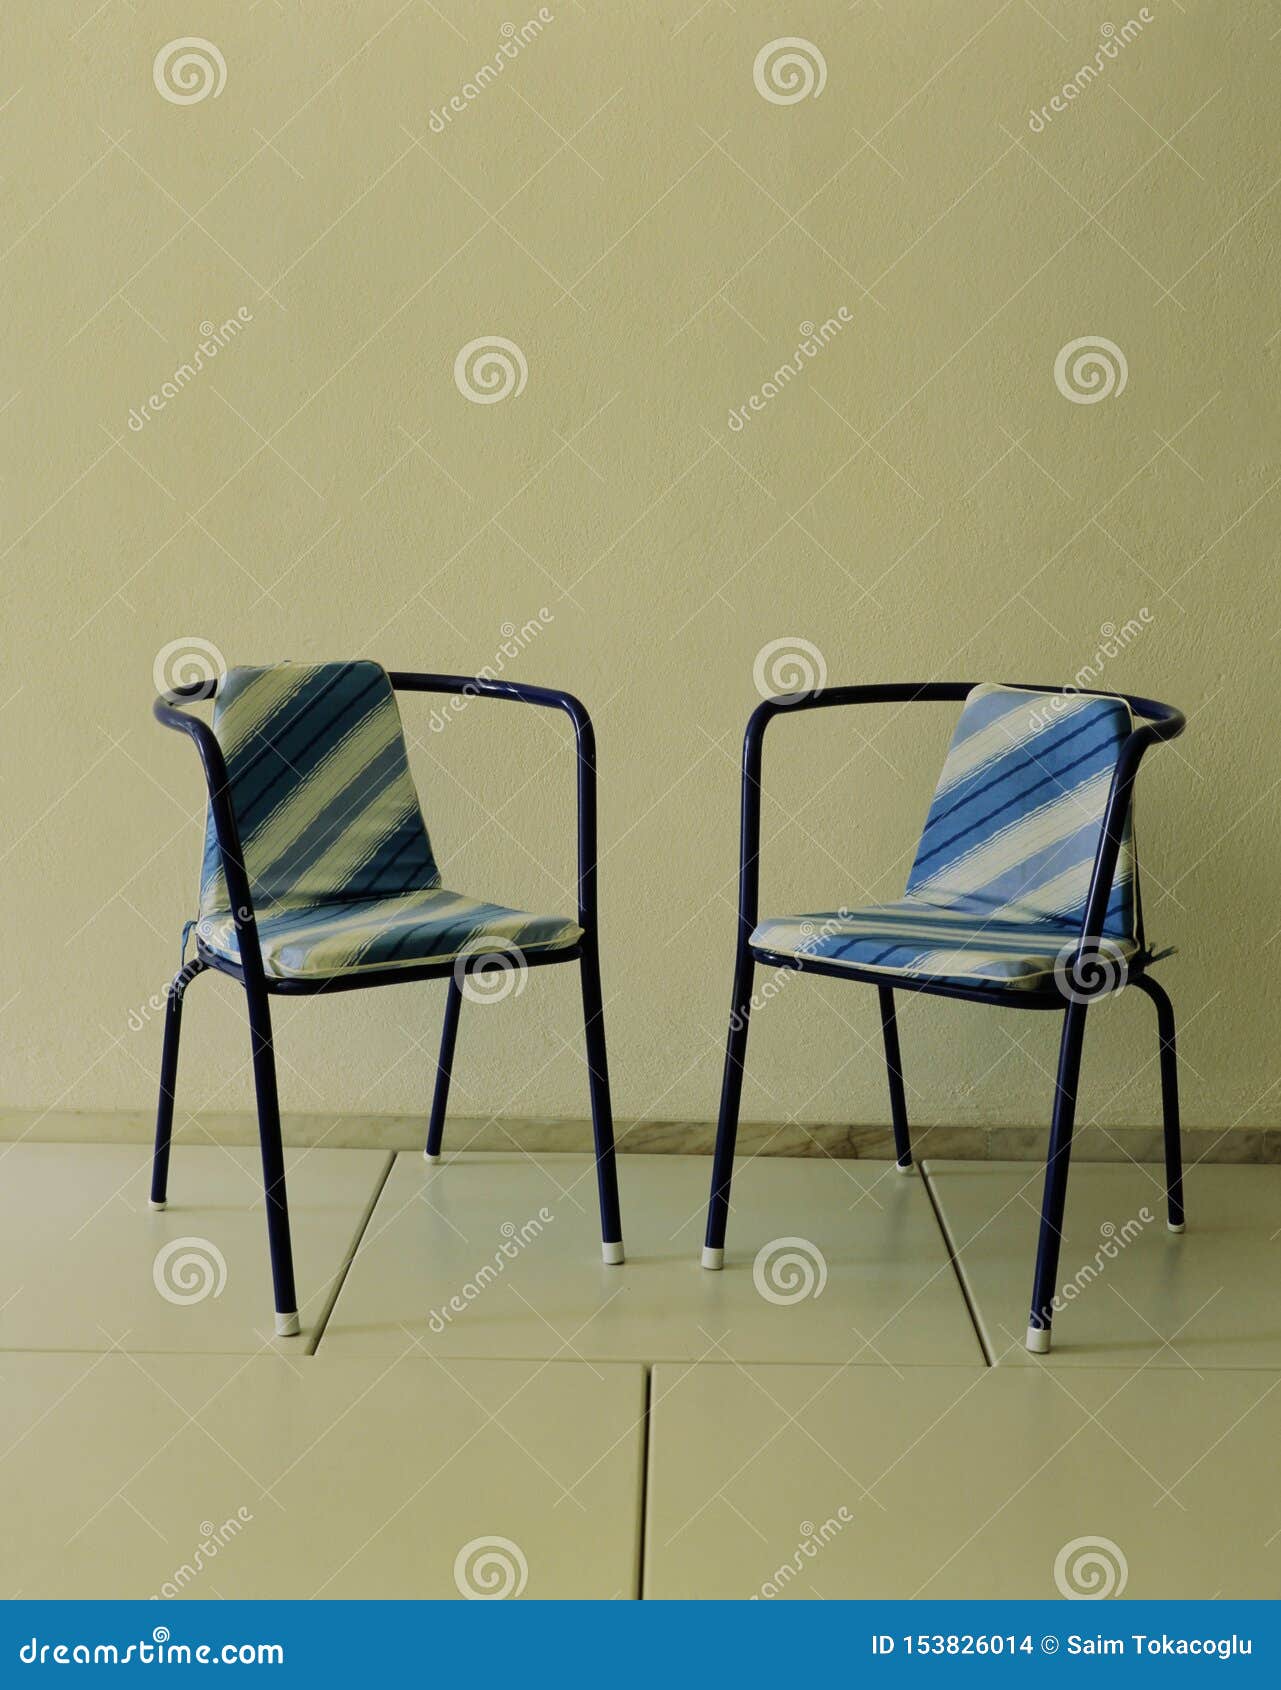 Iron Table And Colorful Chairs Stock Photo Image Of Colorful